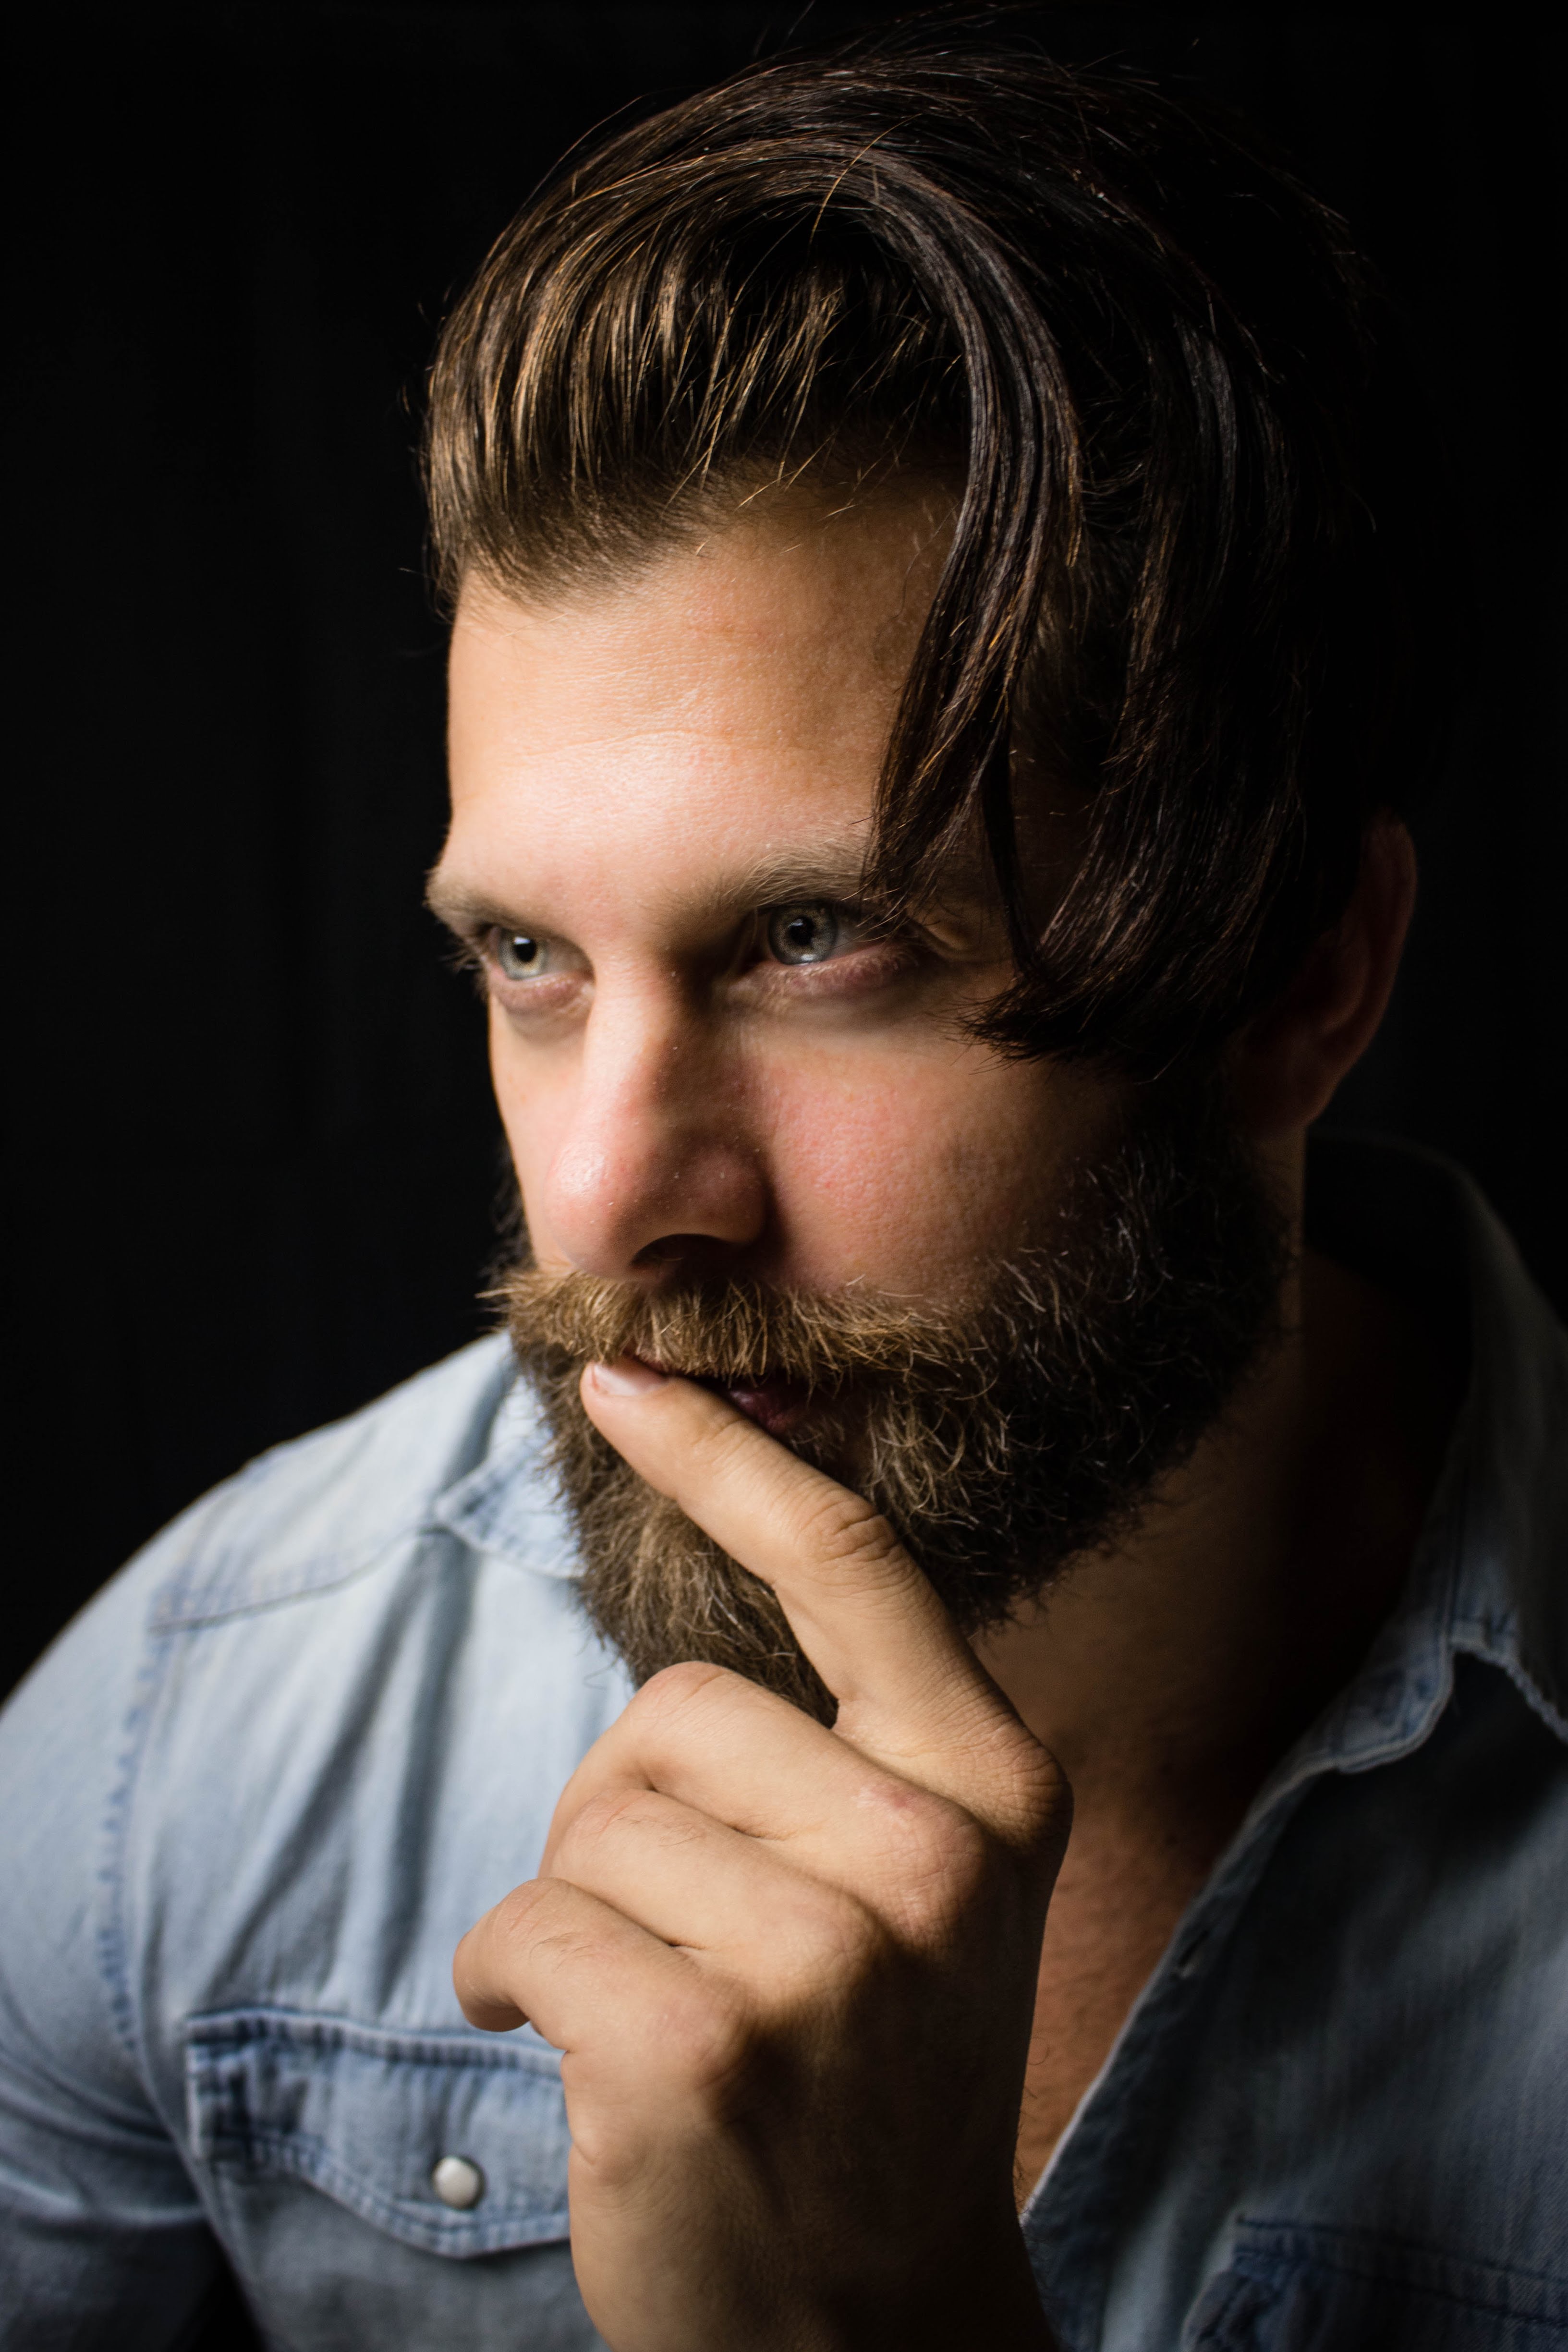 Here's how to be 'beard-tiful' this ‘No Shave November’